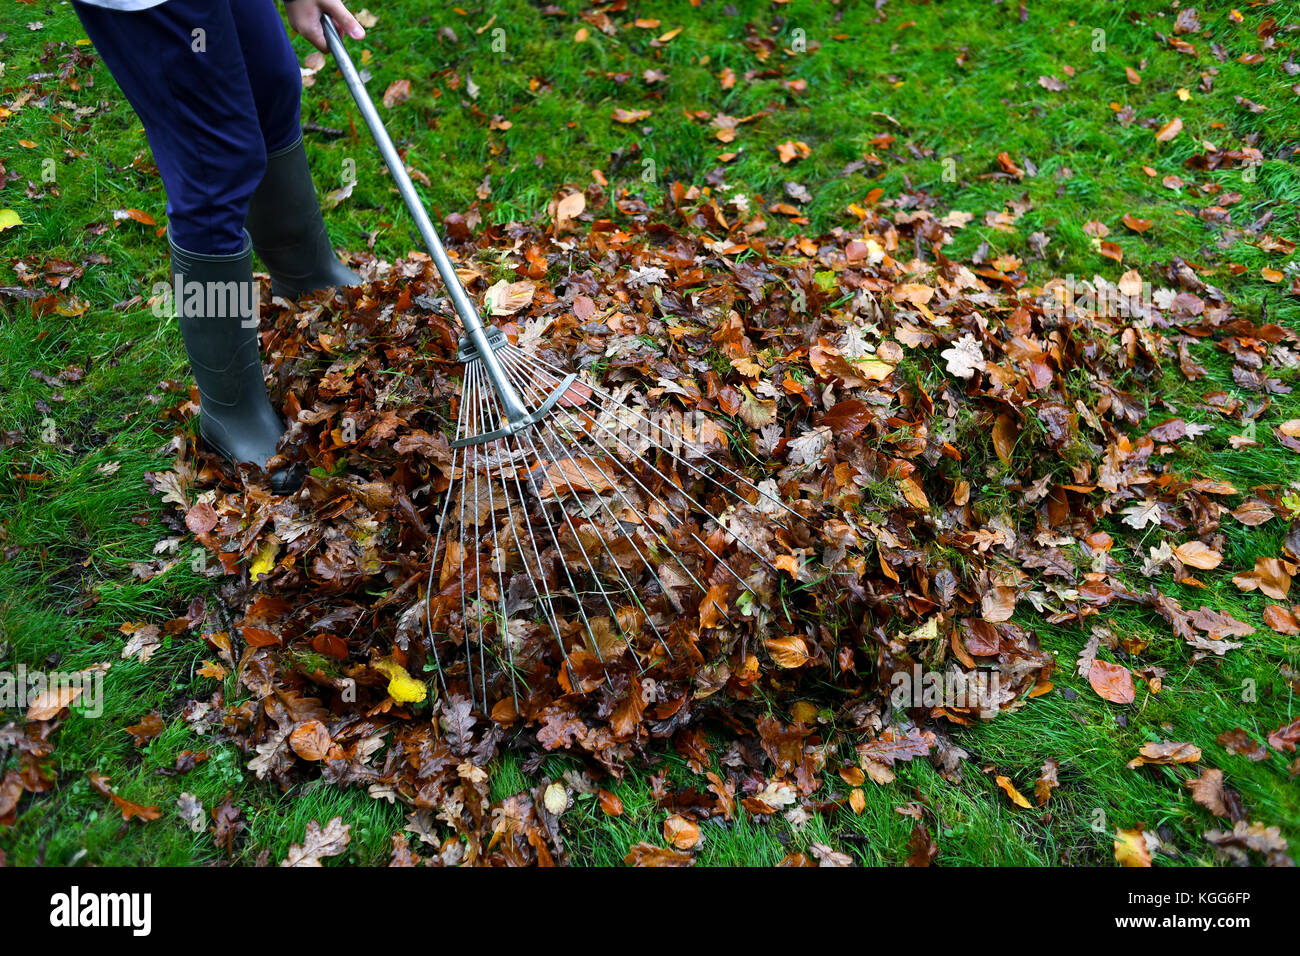 Clearing the garden of fallen leaves from the Autumn fall and recycling them in green garden waste bin for compost. Stock Photo